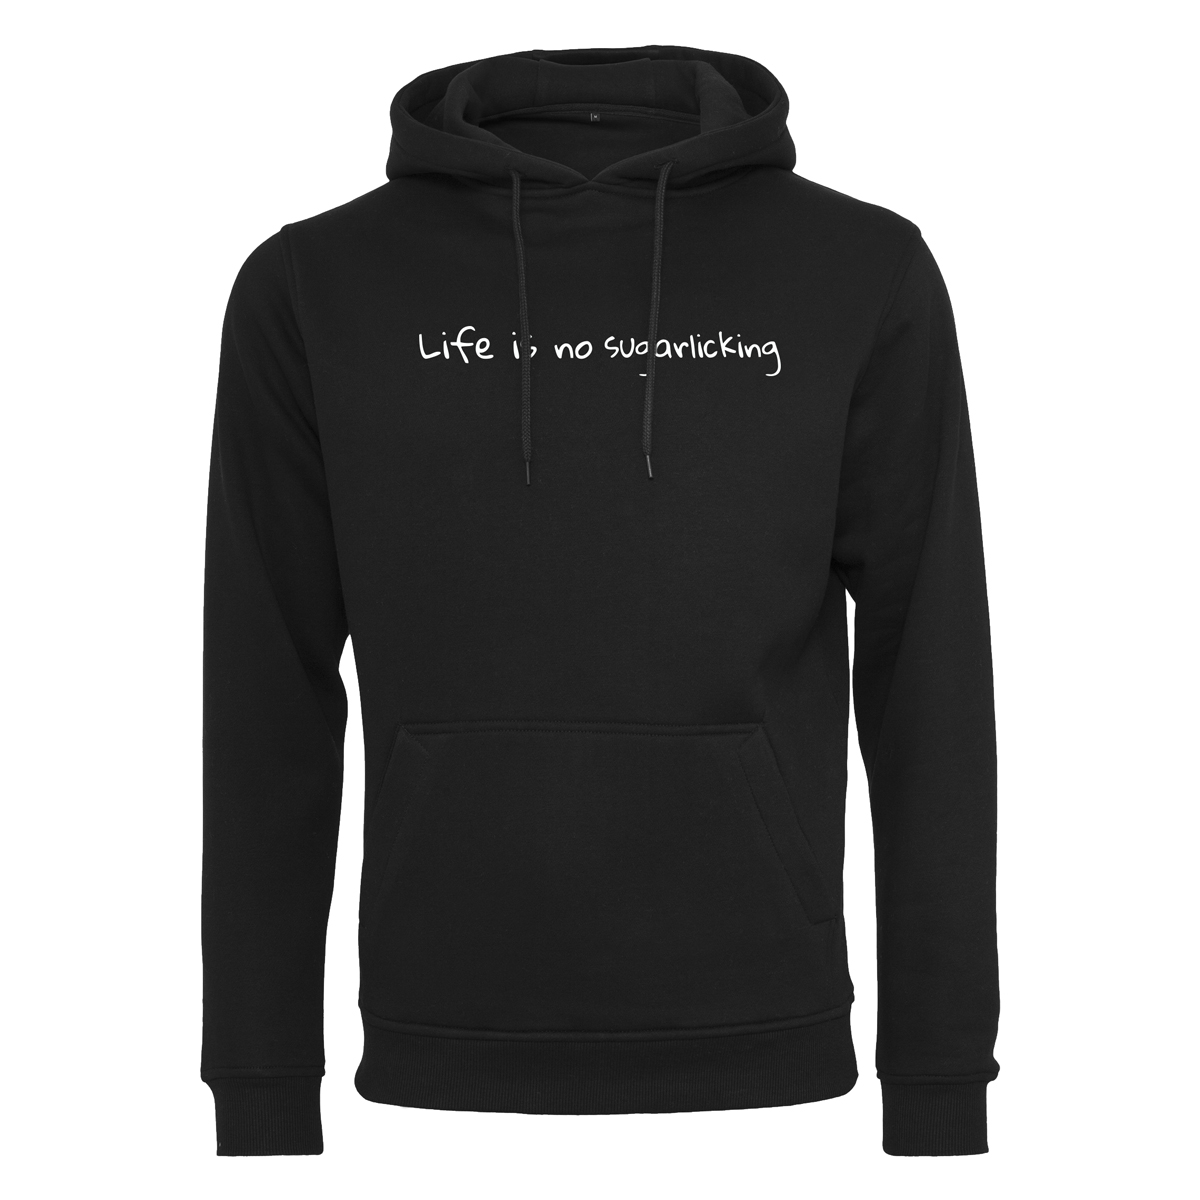 Life is no Woodfairy Holla - Hoodie | Merchandise | sugarlicking The